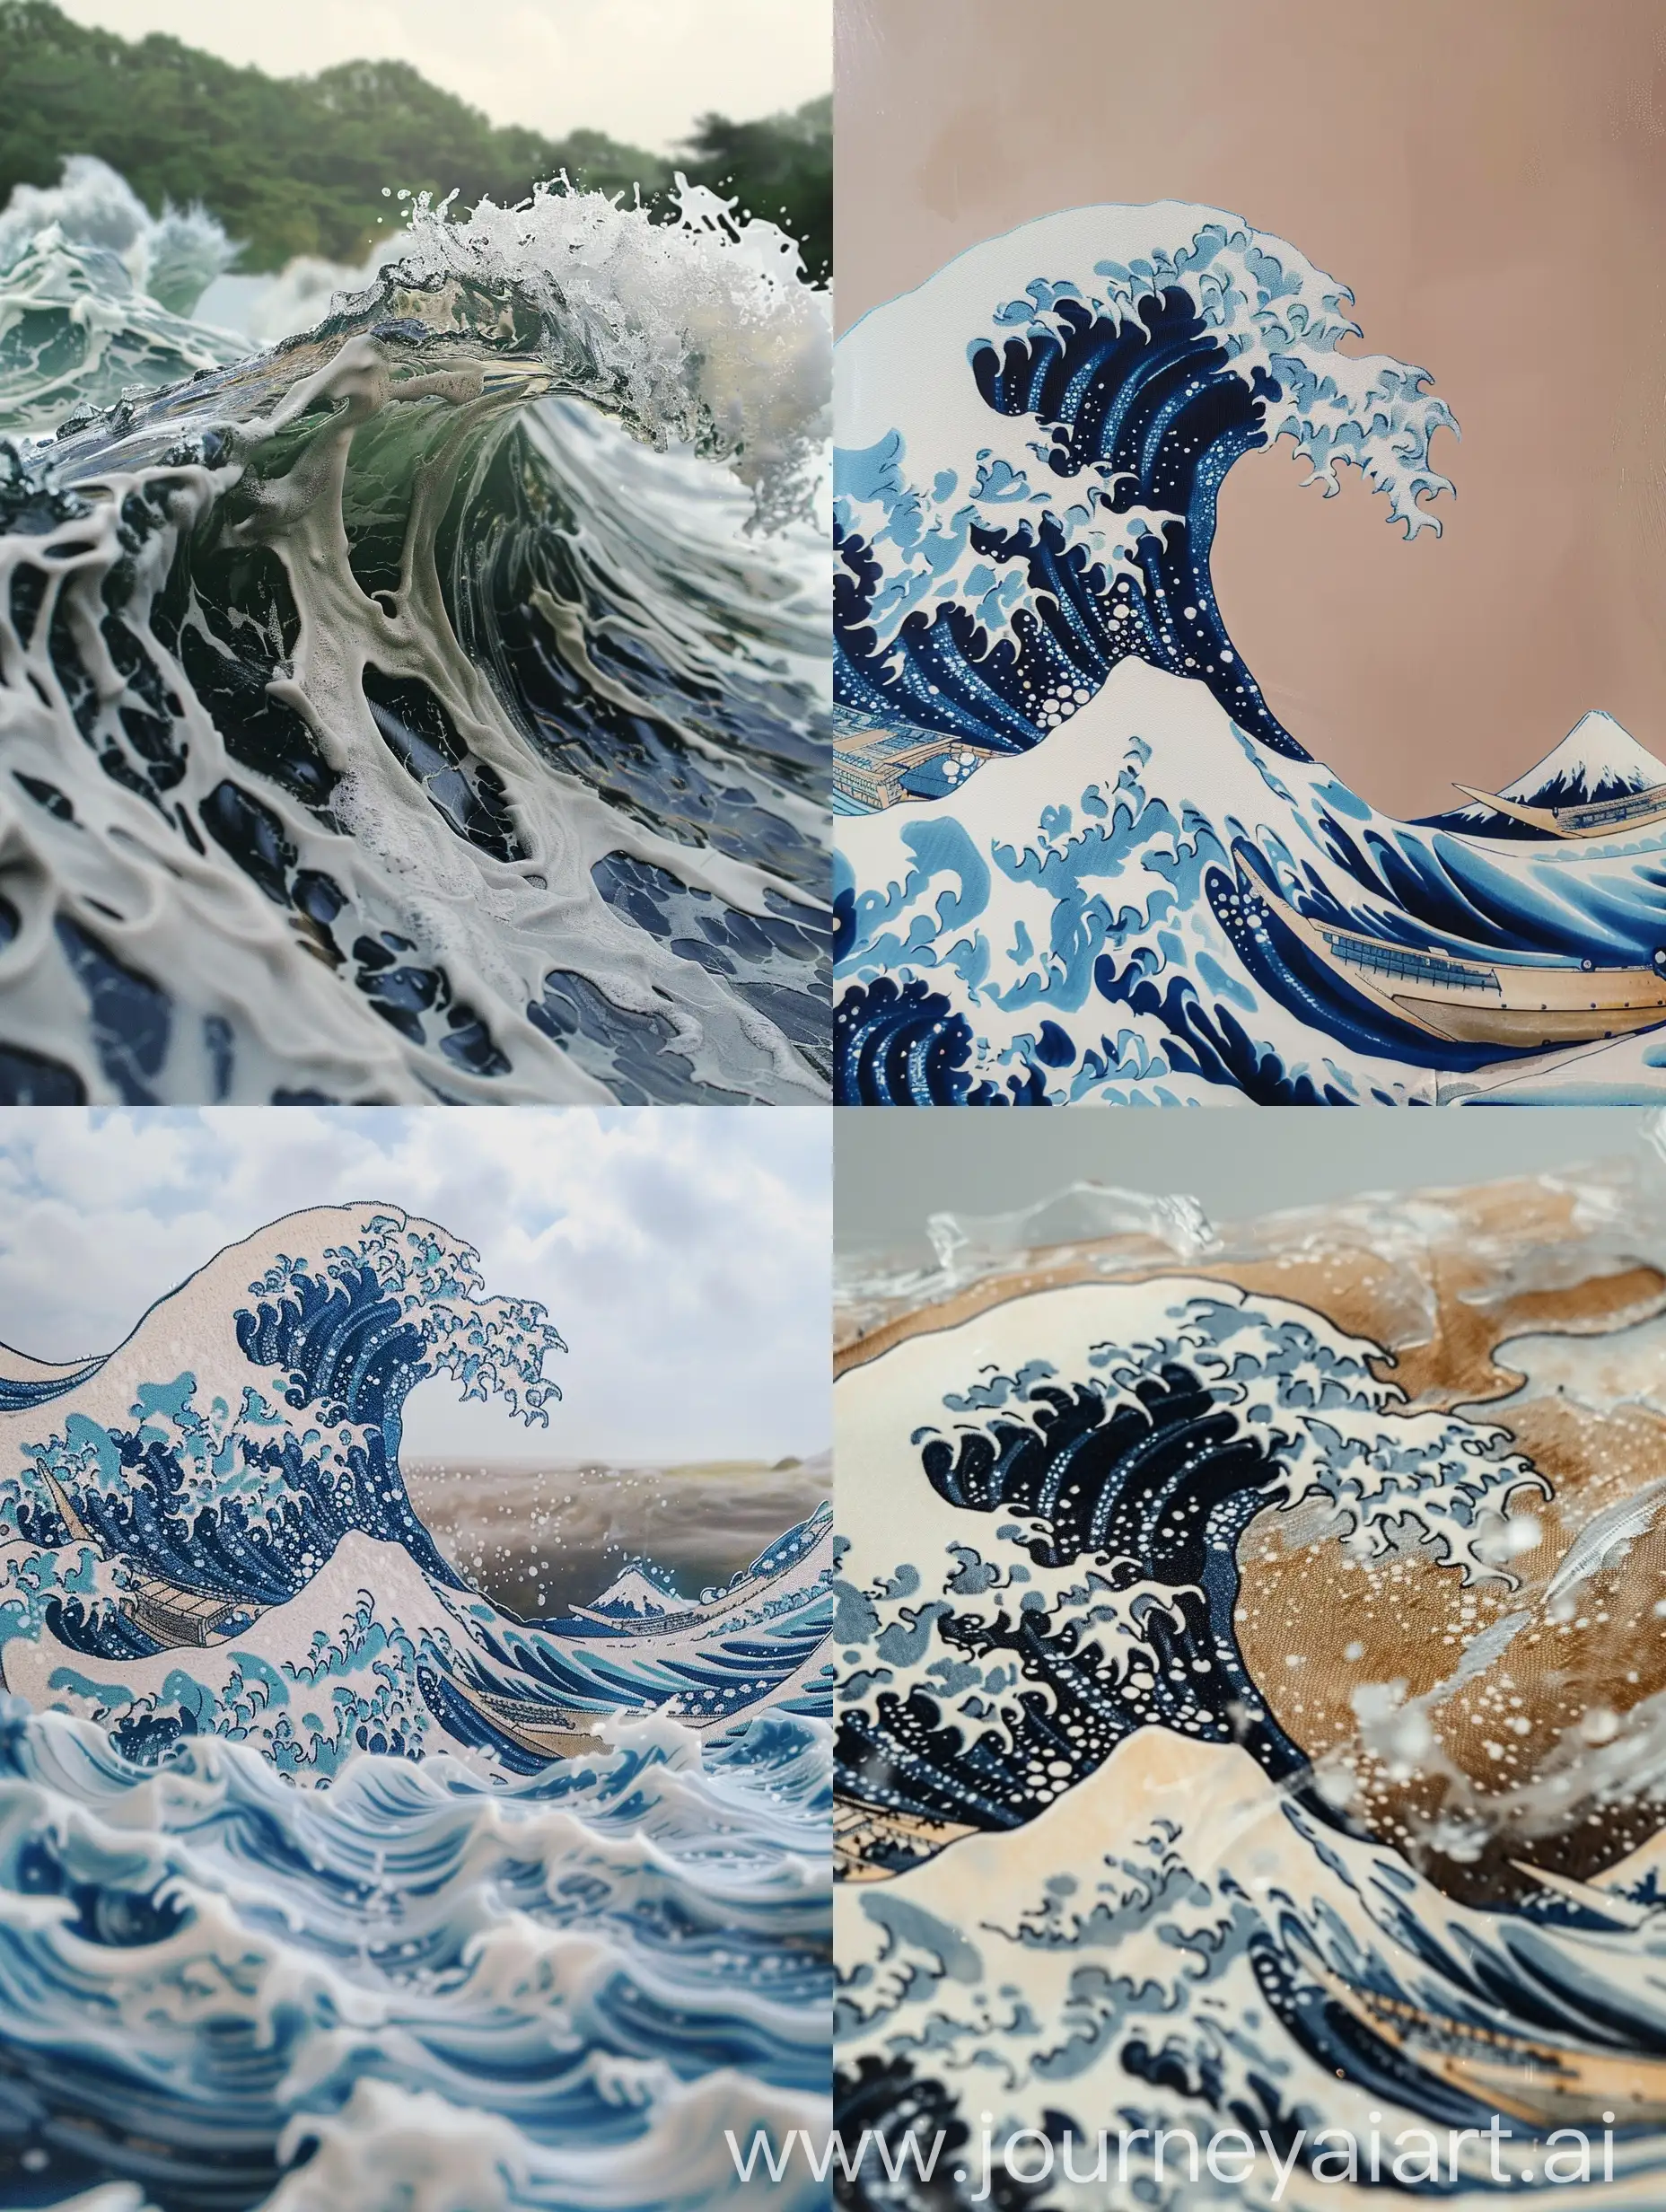 Realistic-Photo-of-Hokusais-Great-Wave-at-34-Aspect-Ratio